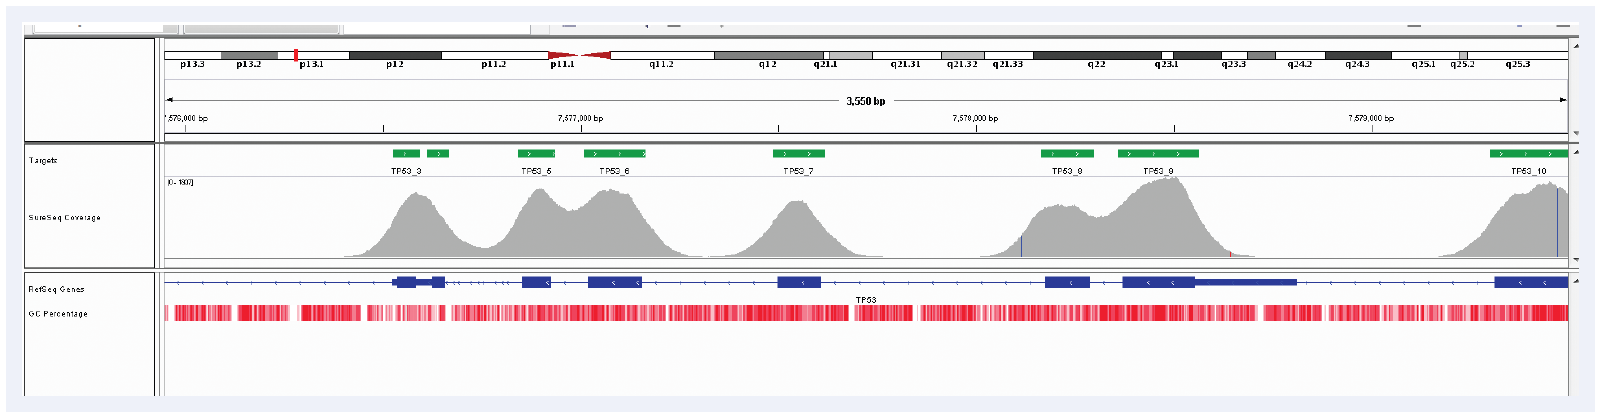 Figure 4: Illustration of the excellent uniformity of coverage of TP53 exons 3 - 9. Depth of coverage per base (grey). Targeted region (green). Gene coding region as defined by RefSeq (blue). GC percentage (red).